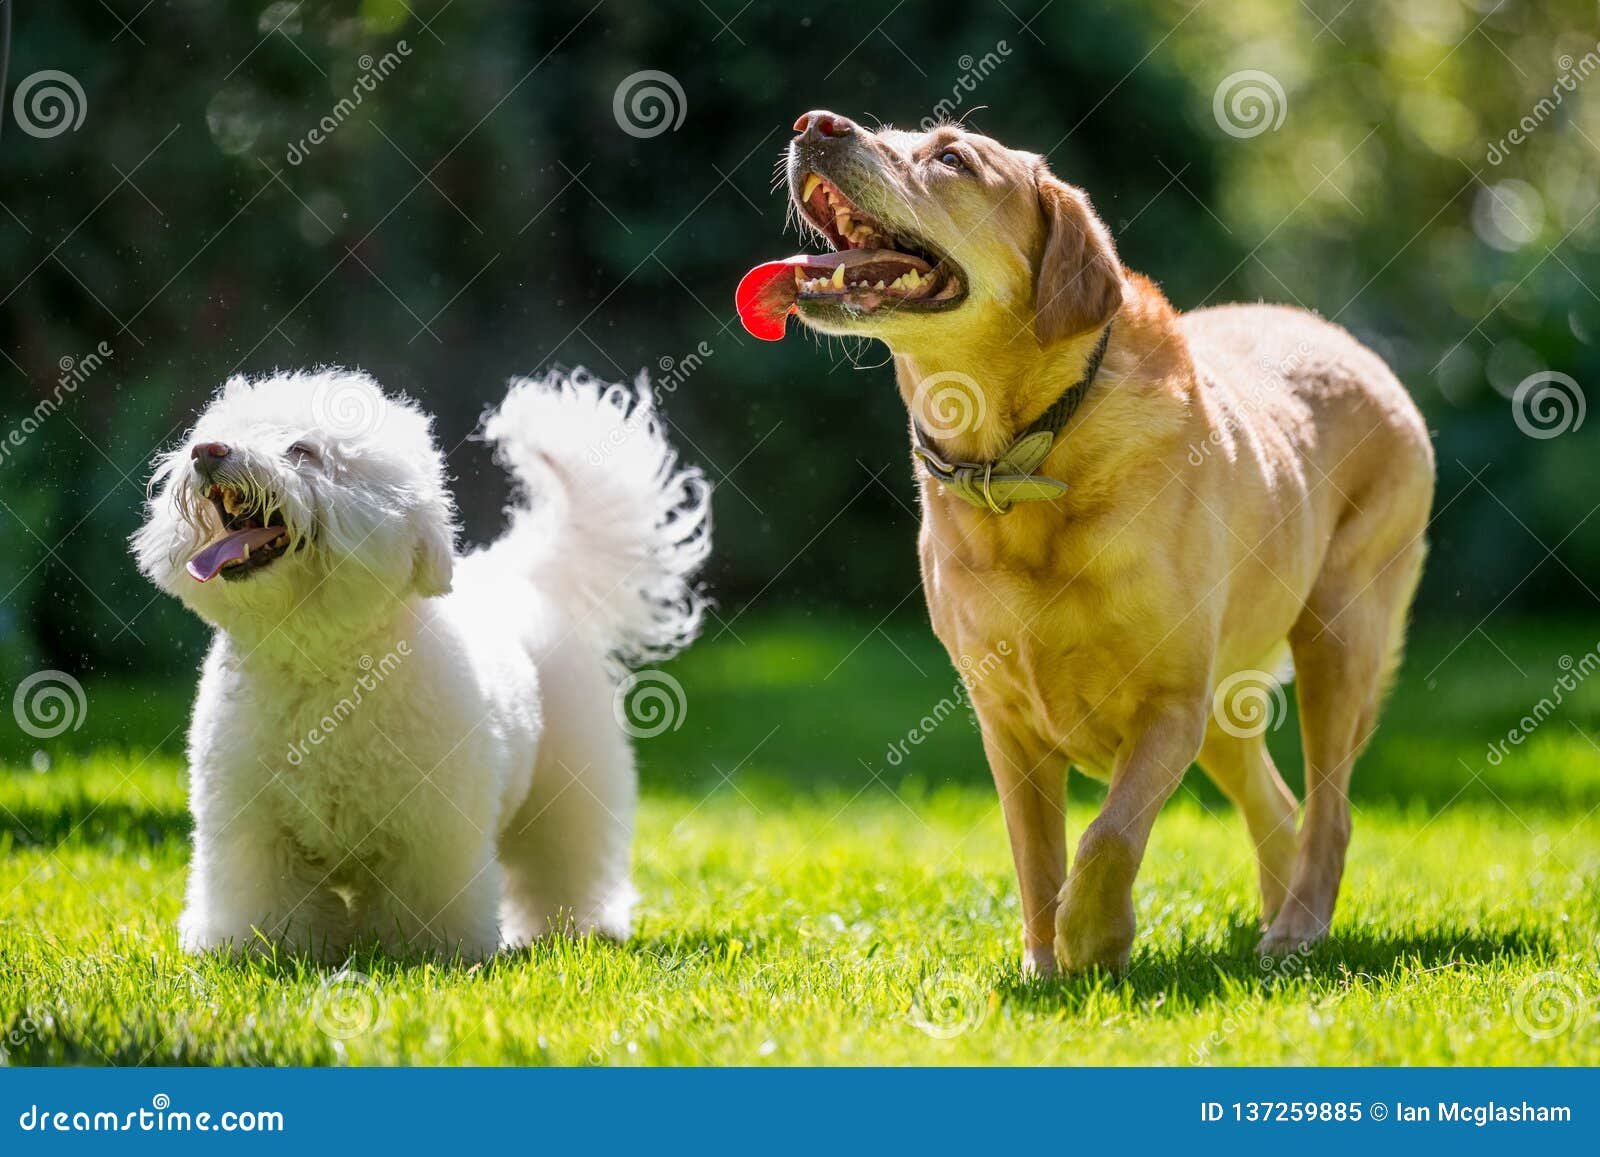 Labrador And Bichon Frise Poodle Looking Up On A Sunny Day Stock Image Image Of Floppy Grass